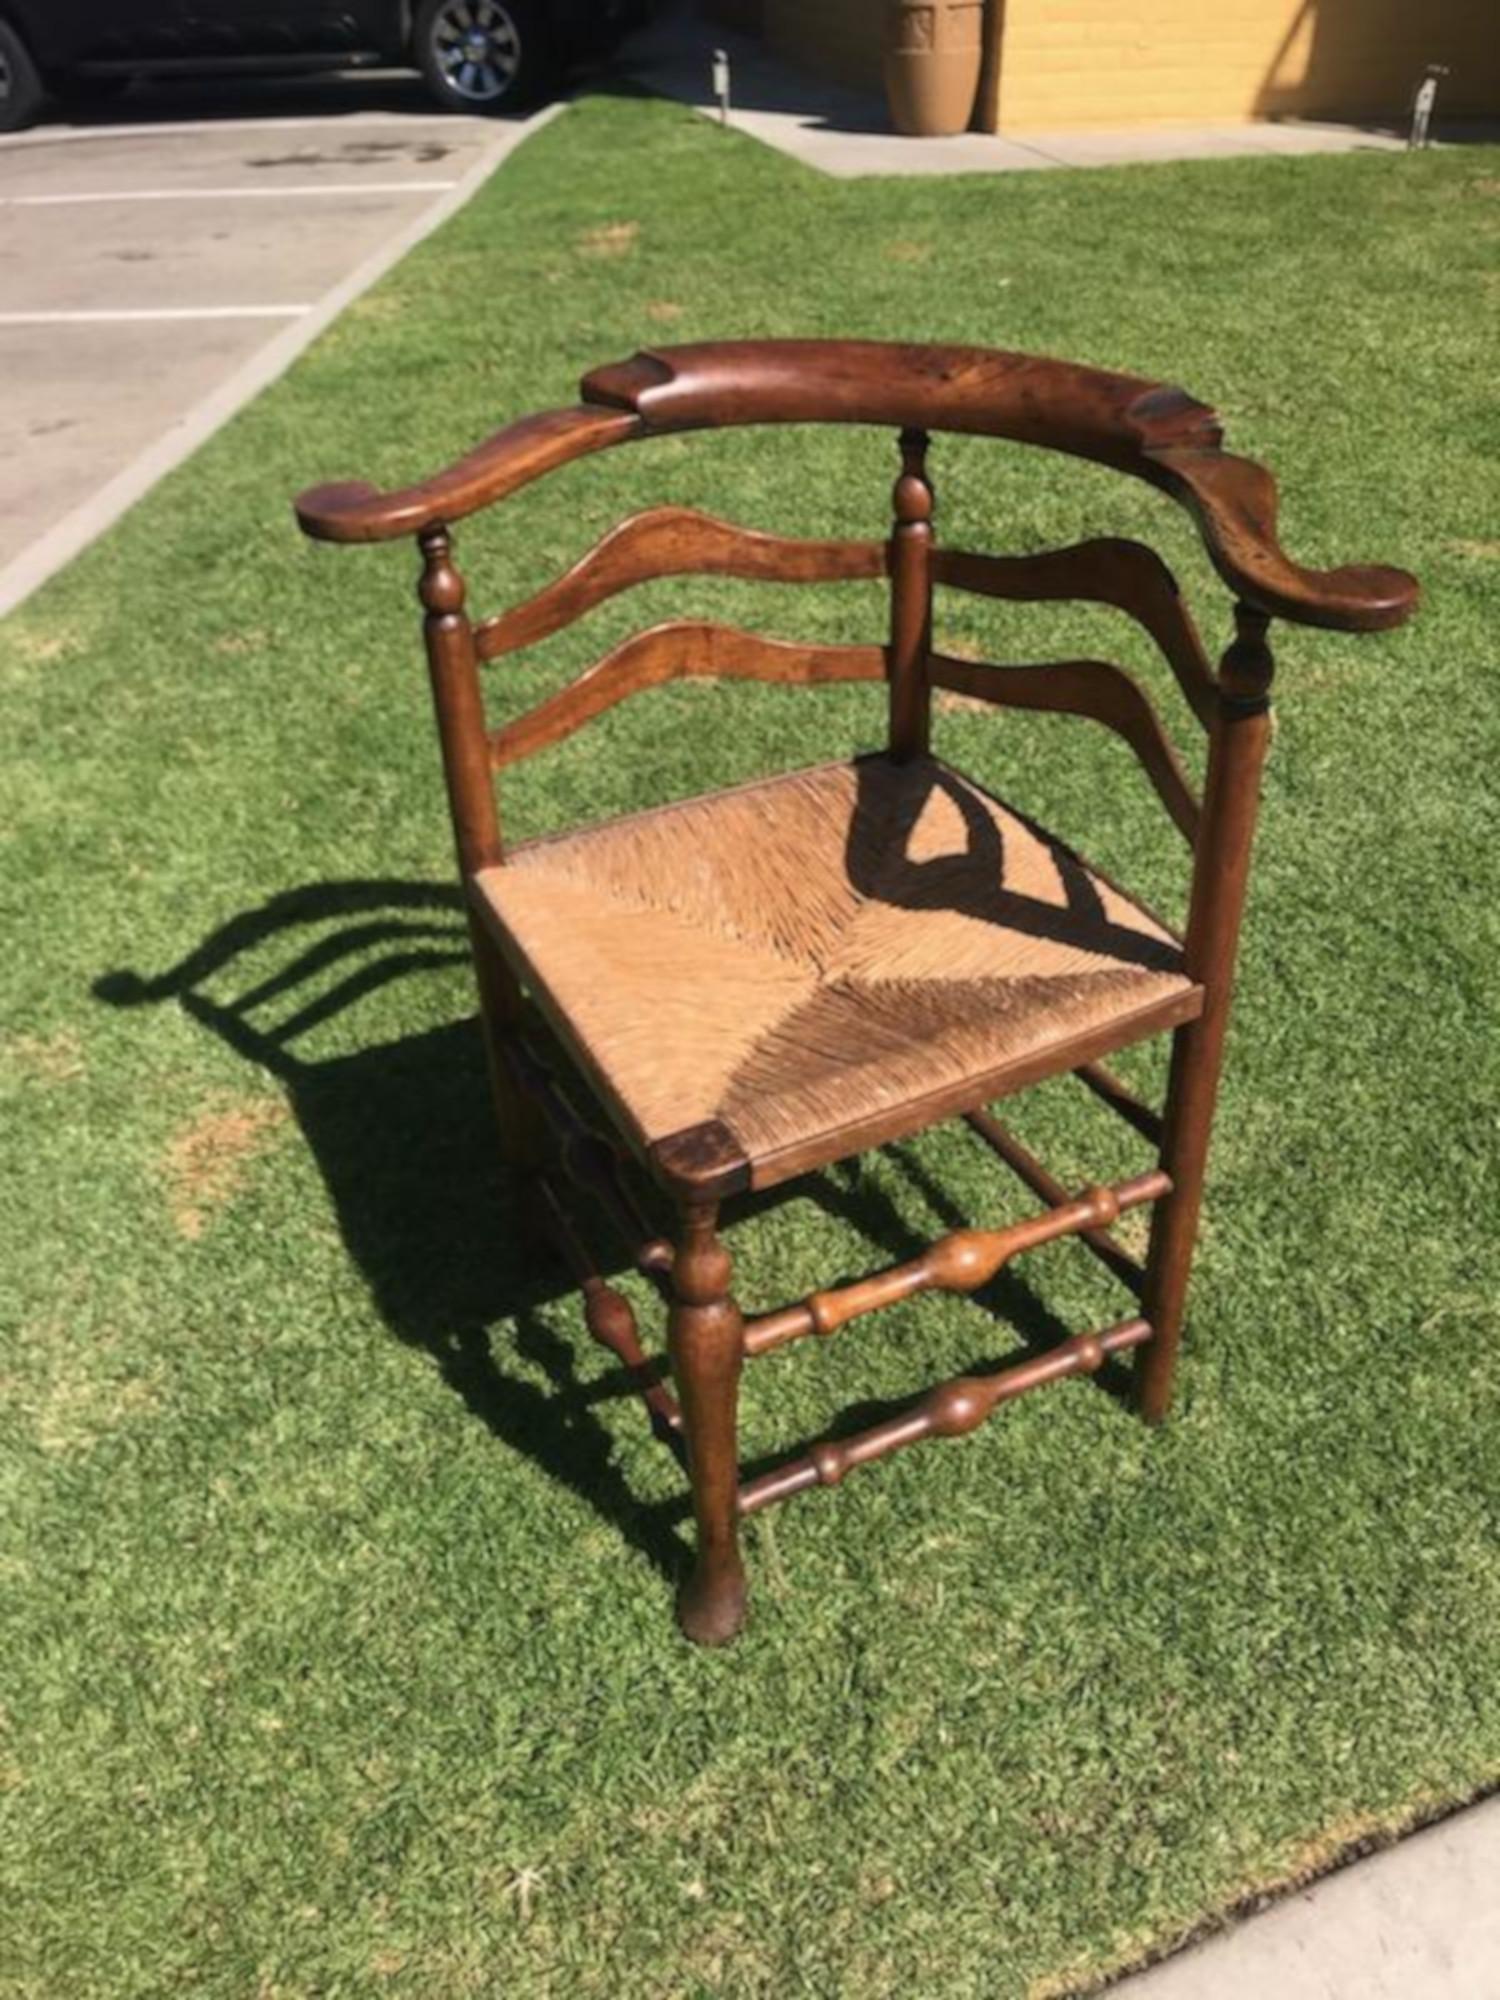 Hand-Carved 18th Century Corner Chair from New England with Original Woven Seat